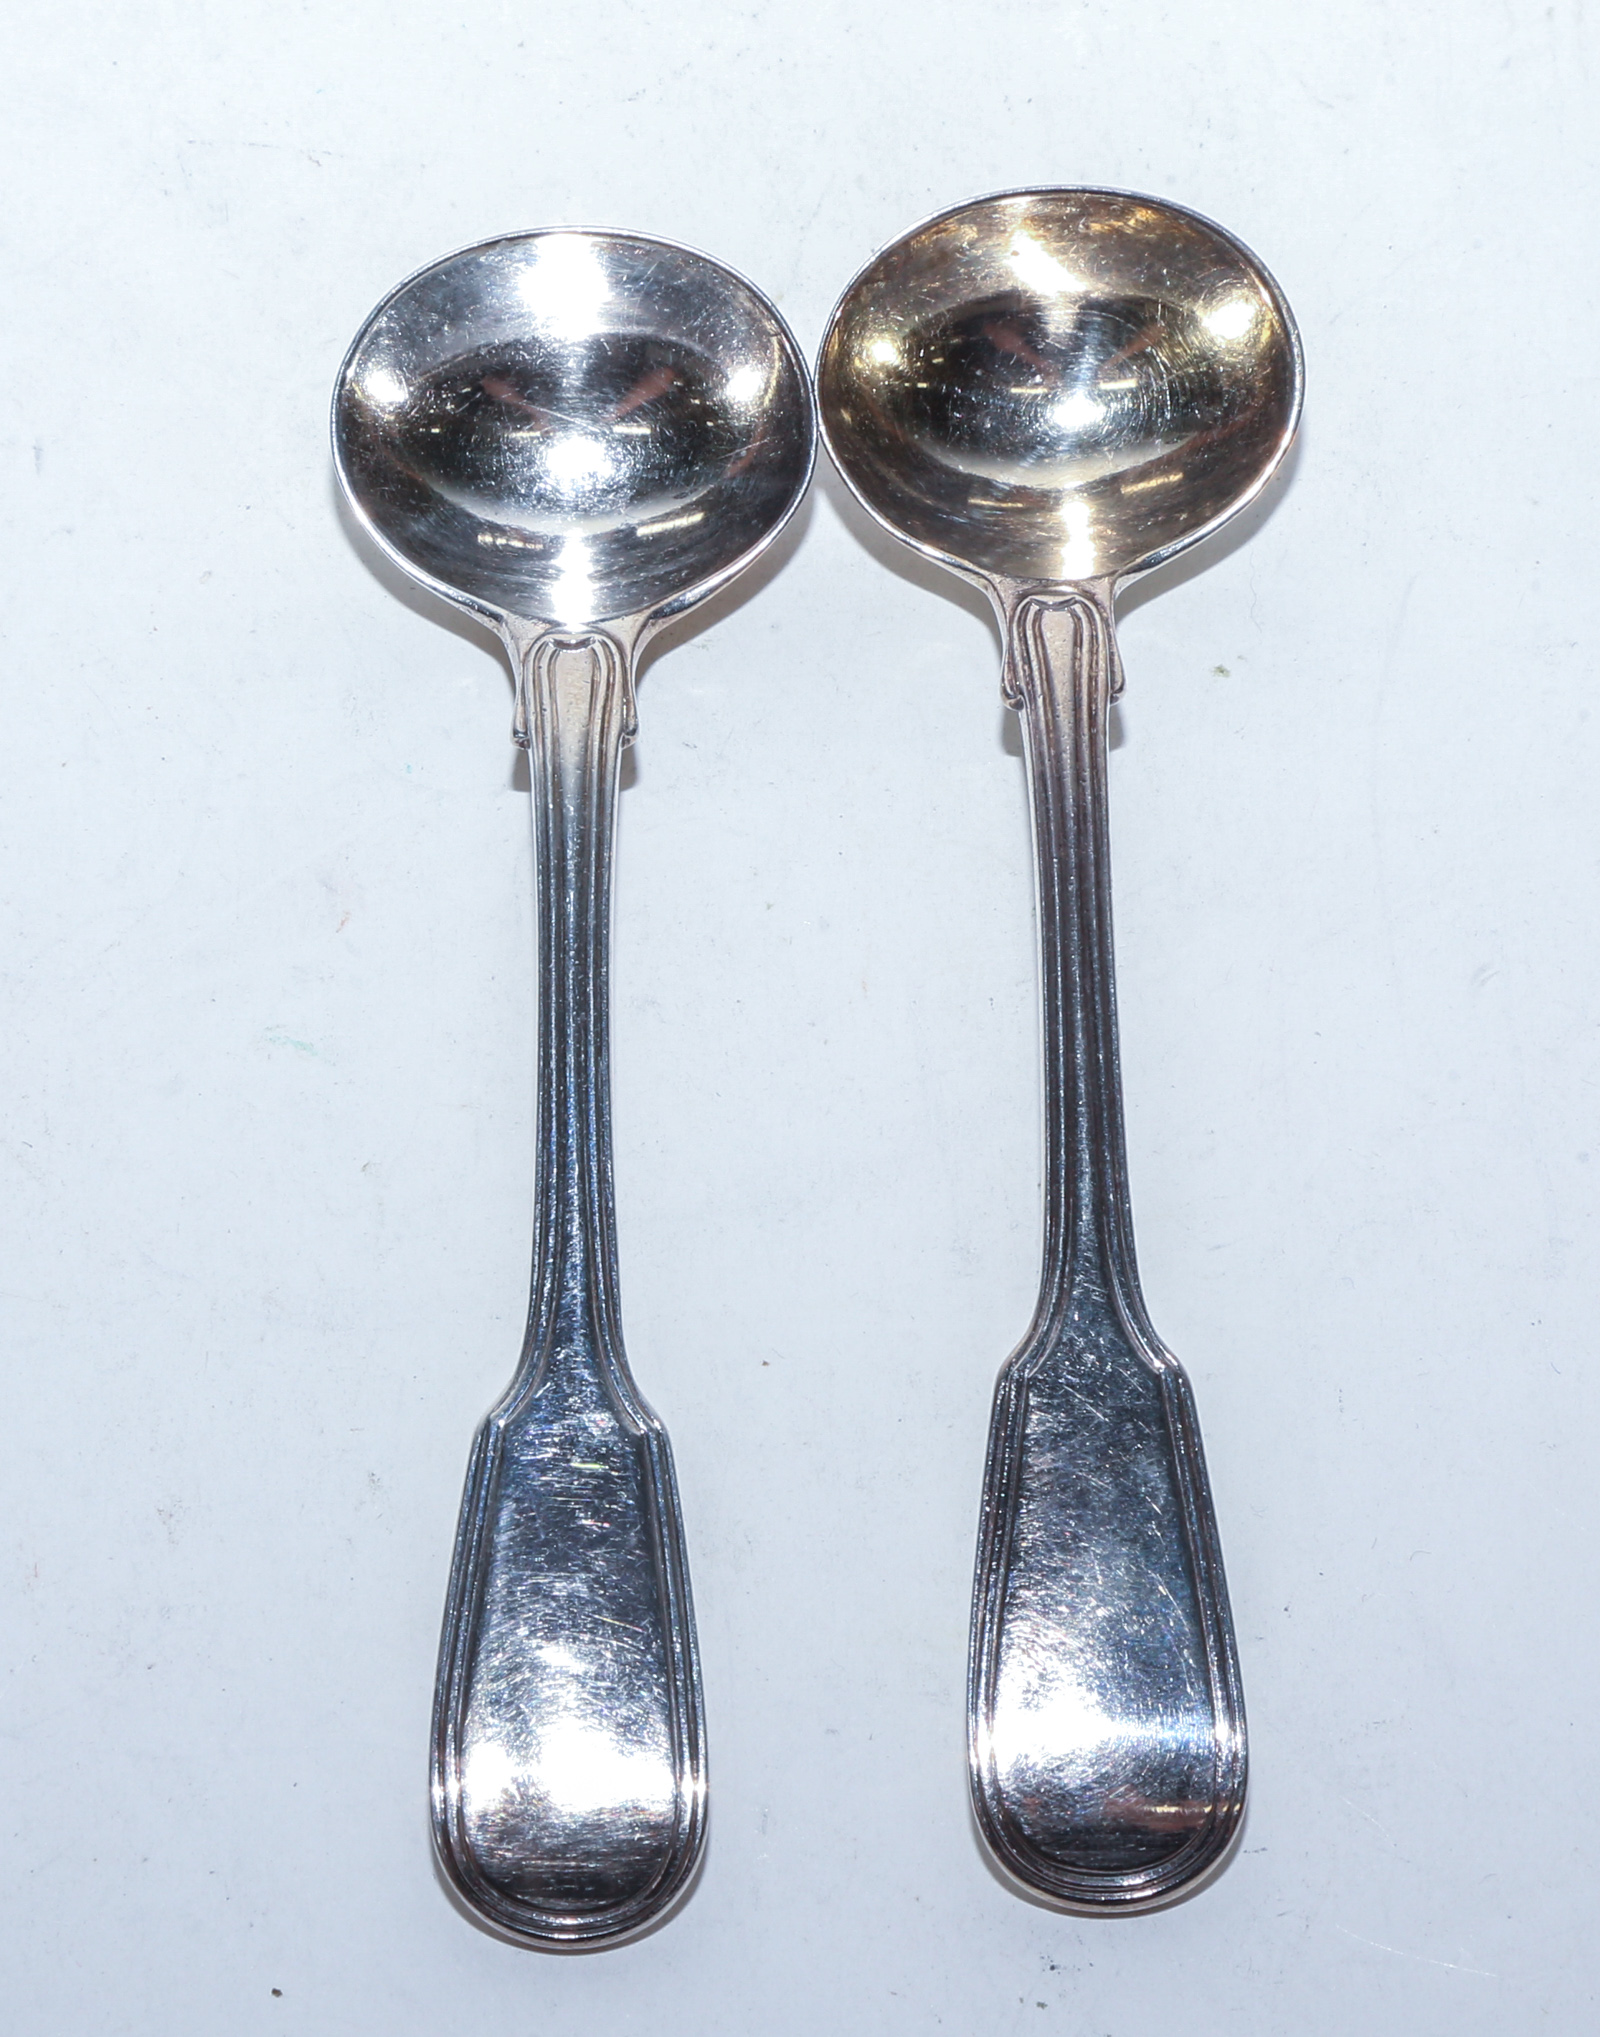 TWO HALLMARKED MUSTARD SPOONS 1.2 troy